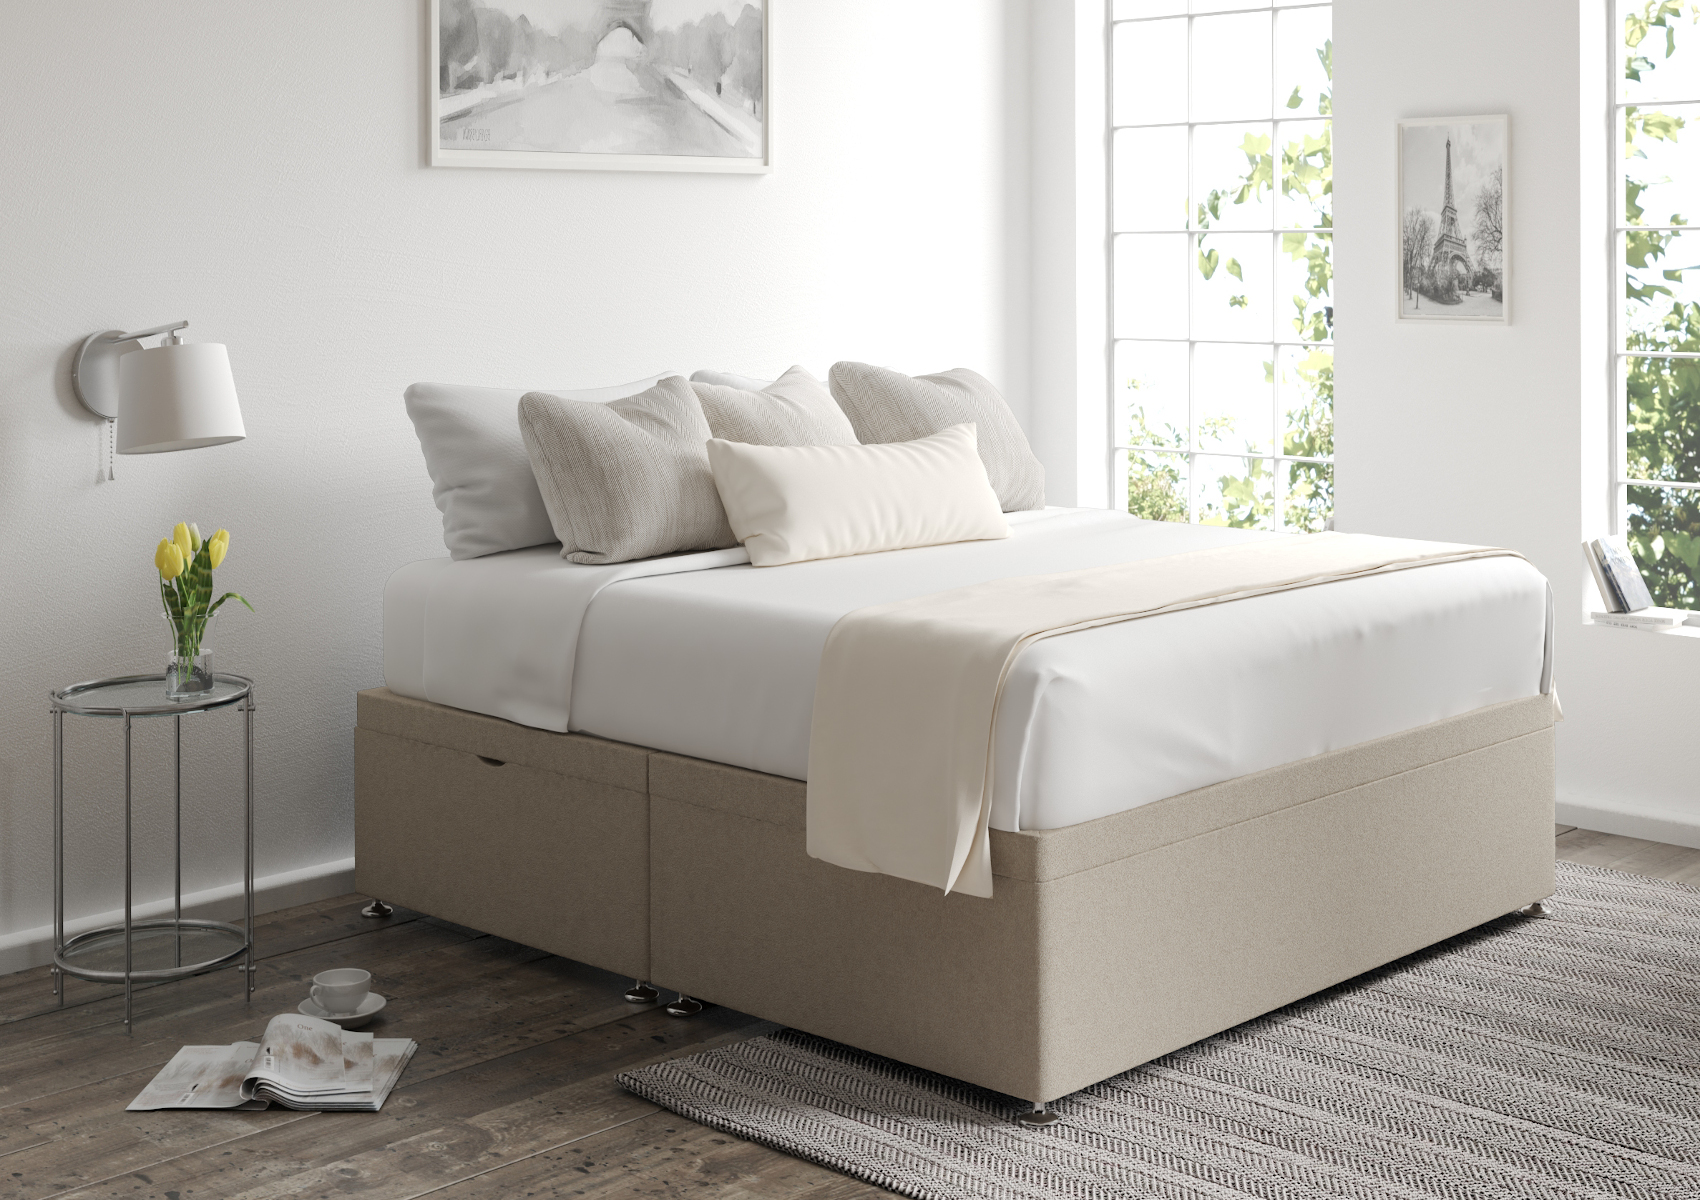 View Ottoman Arran Natural Upholstered Single Ottoman Bed Time4Sleep information